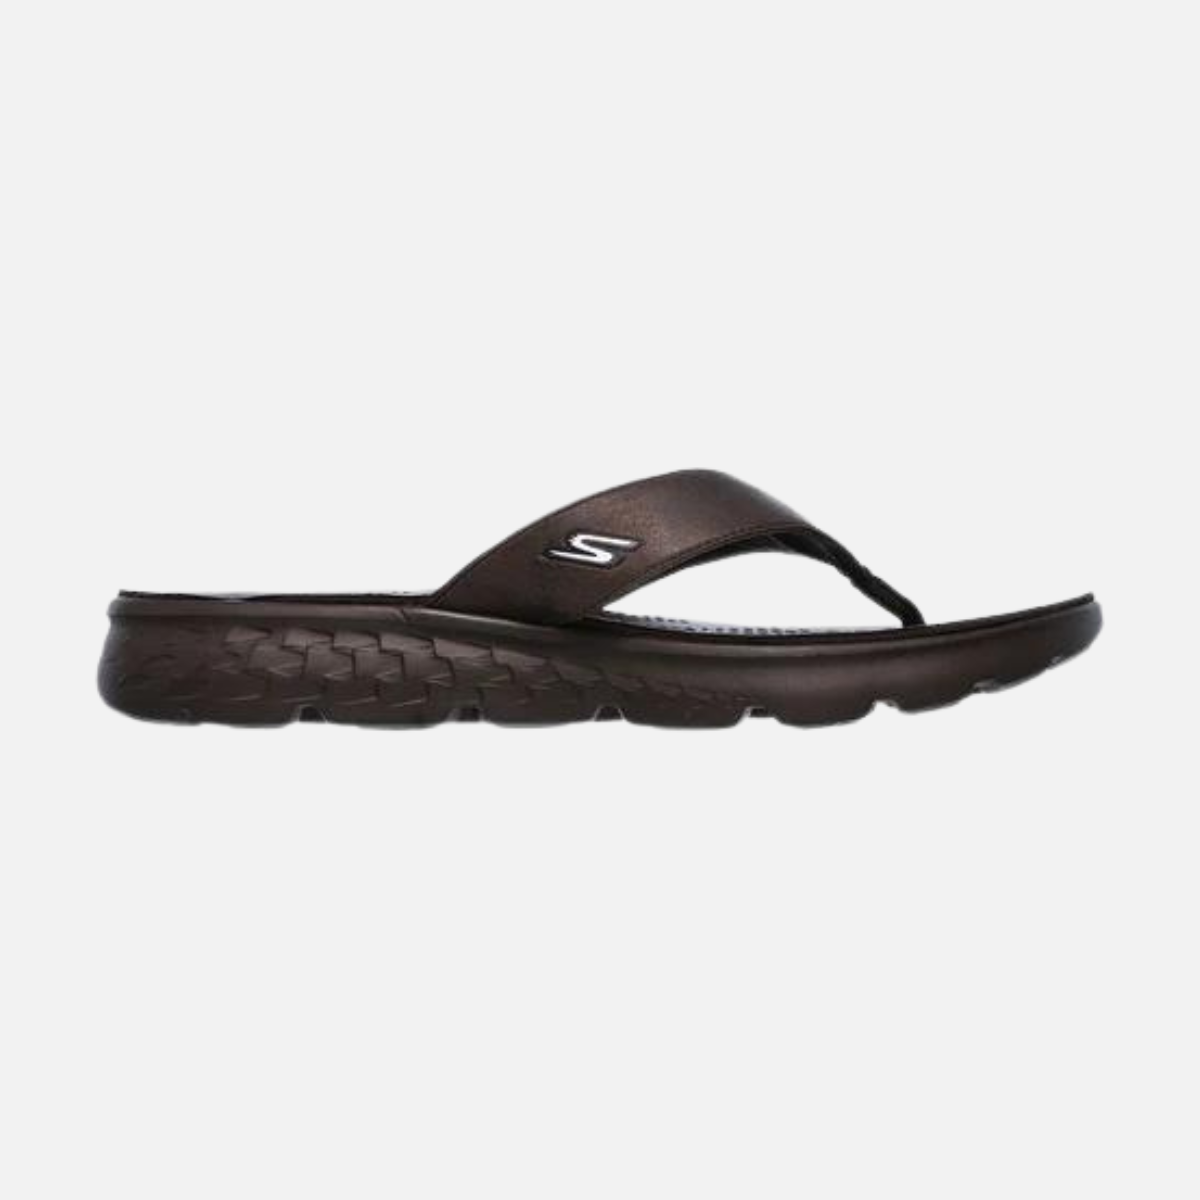 Skechers On The Go 400 Vista Slippers -Chocolate